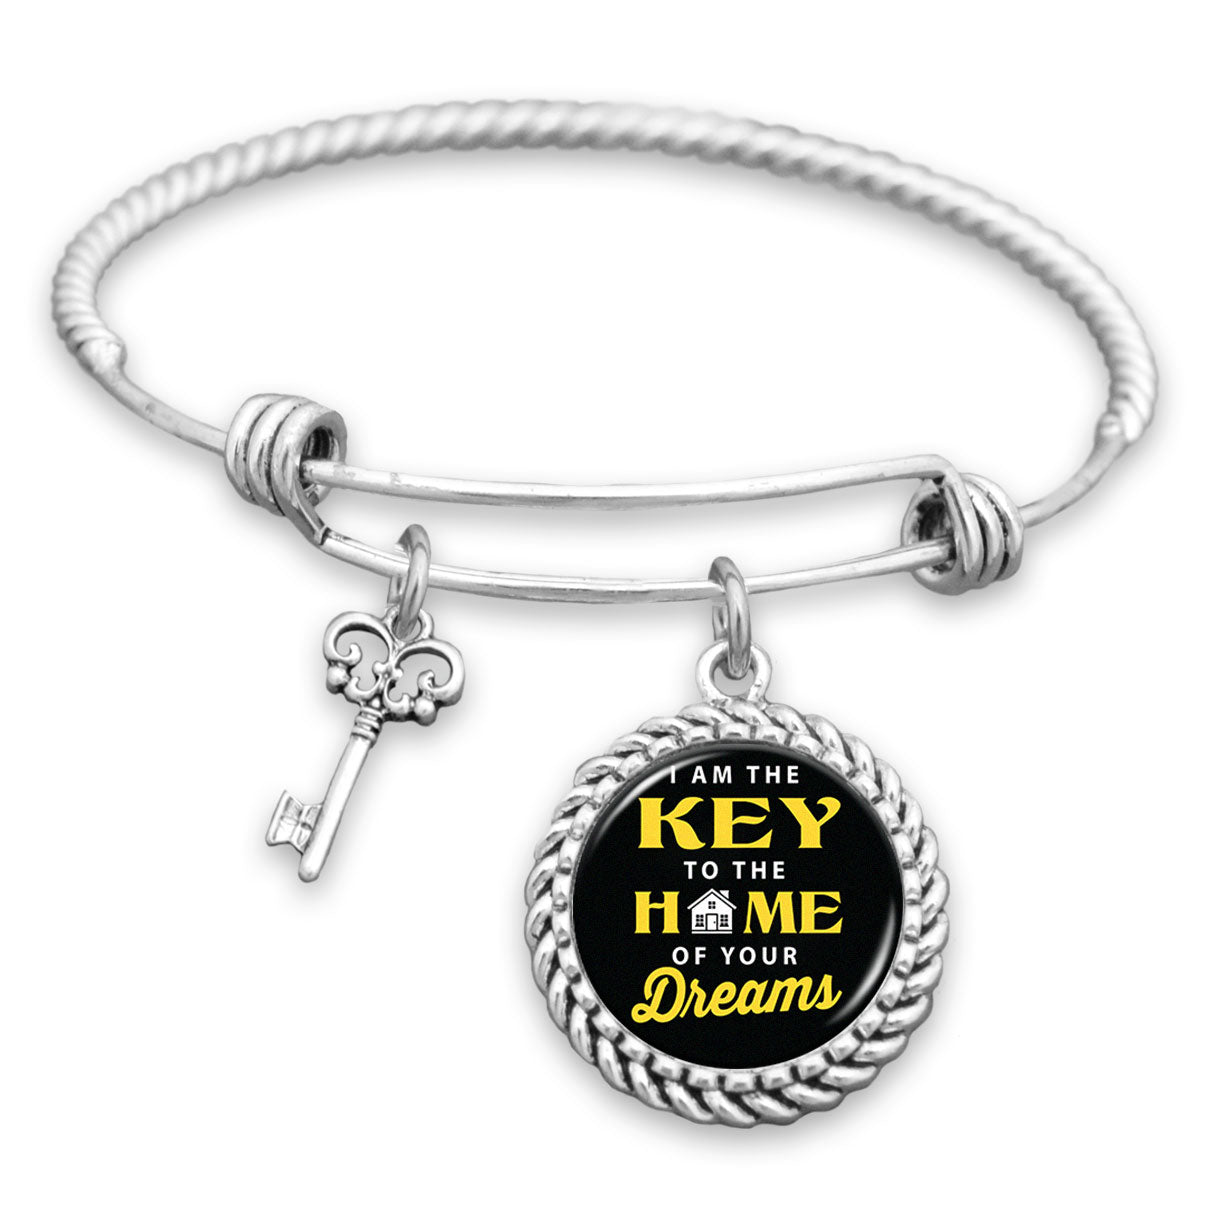 I Am The Key To The Home of Your Dreams Charm Bracelet